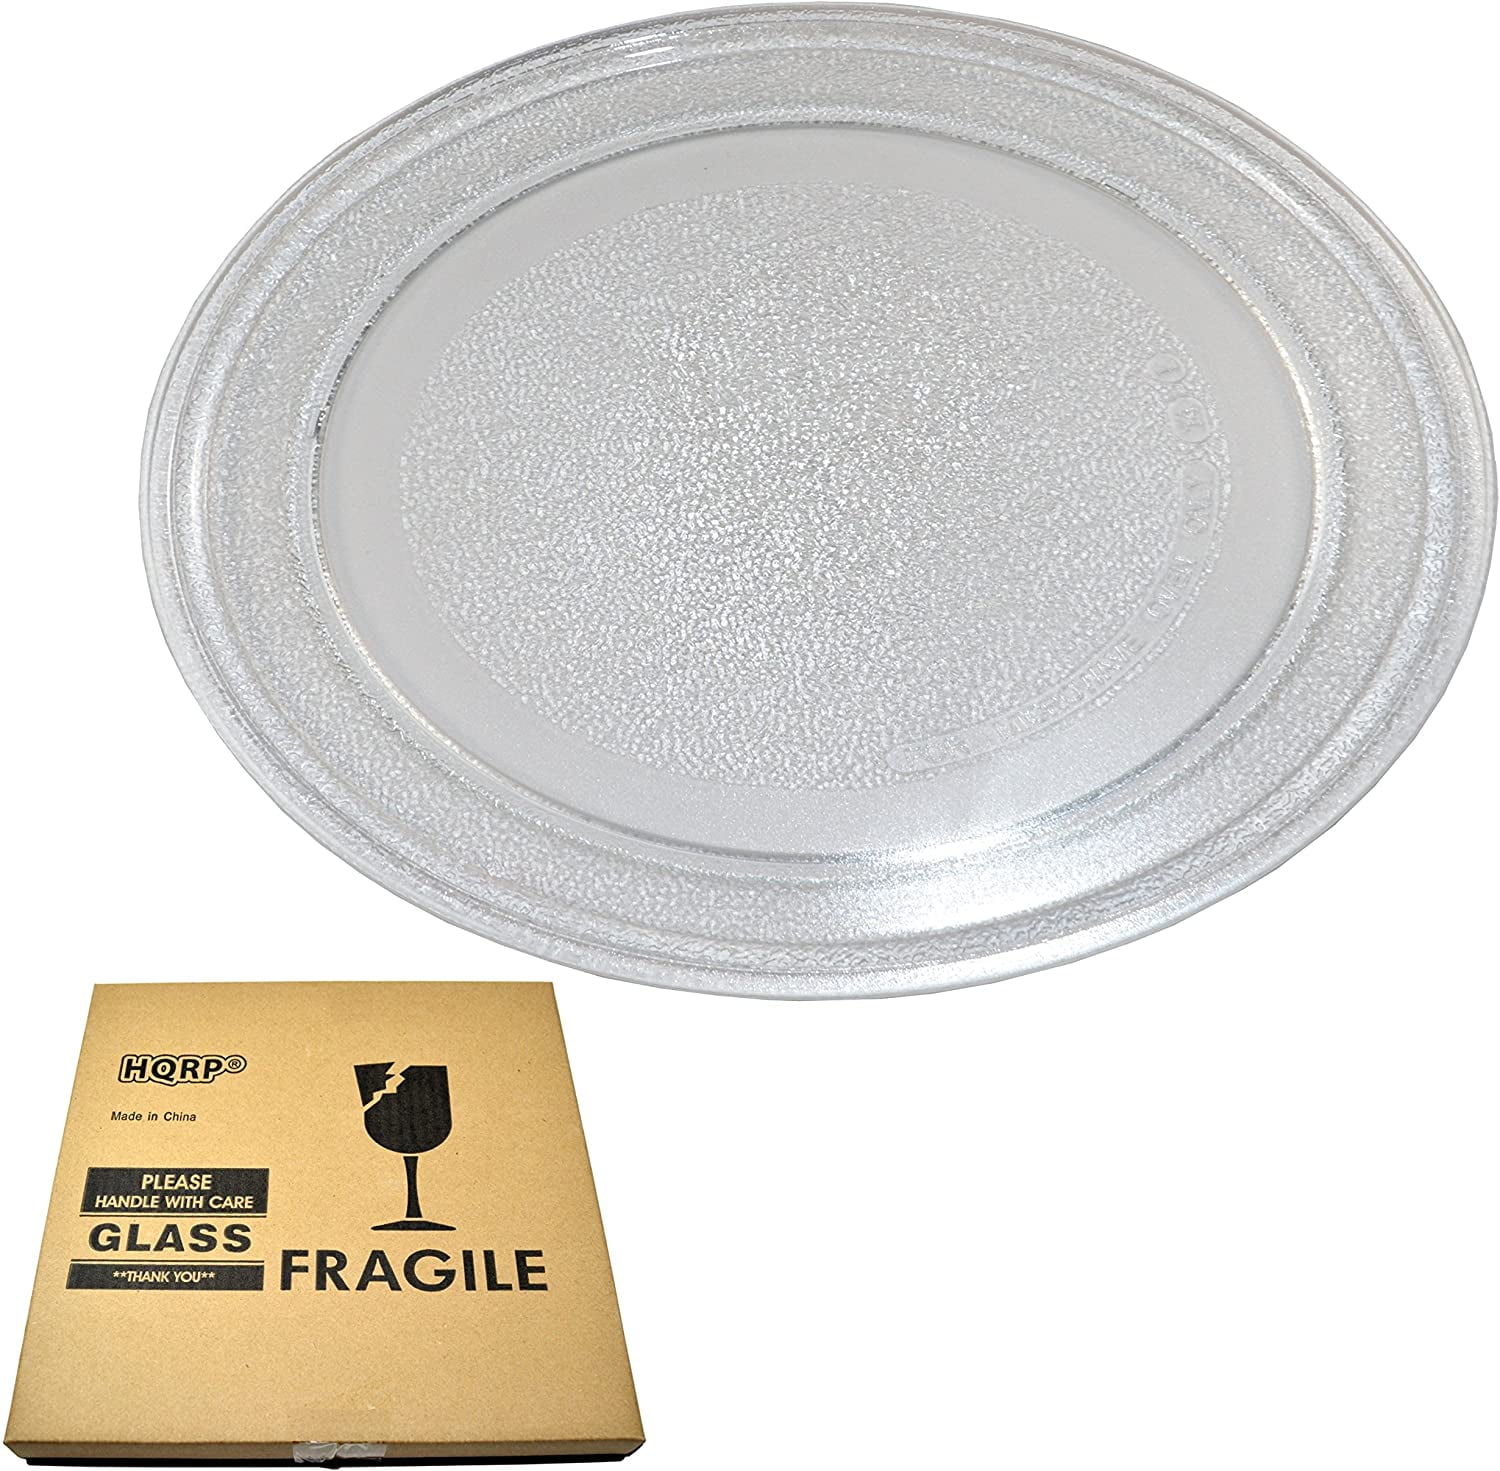 SBM7700W Microwave Glass Turntable Plate Tray for Sunbeam SM0701A7E 9 5/8" 